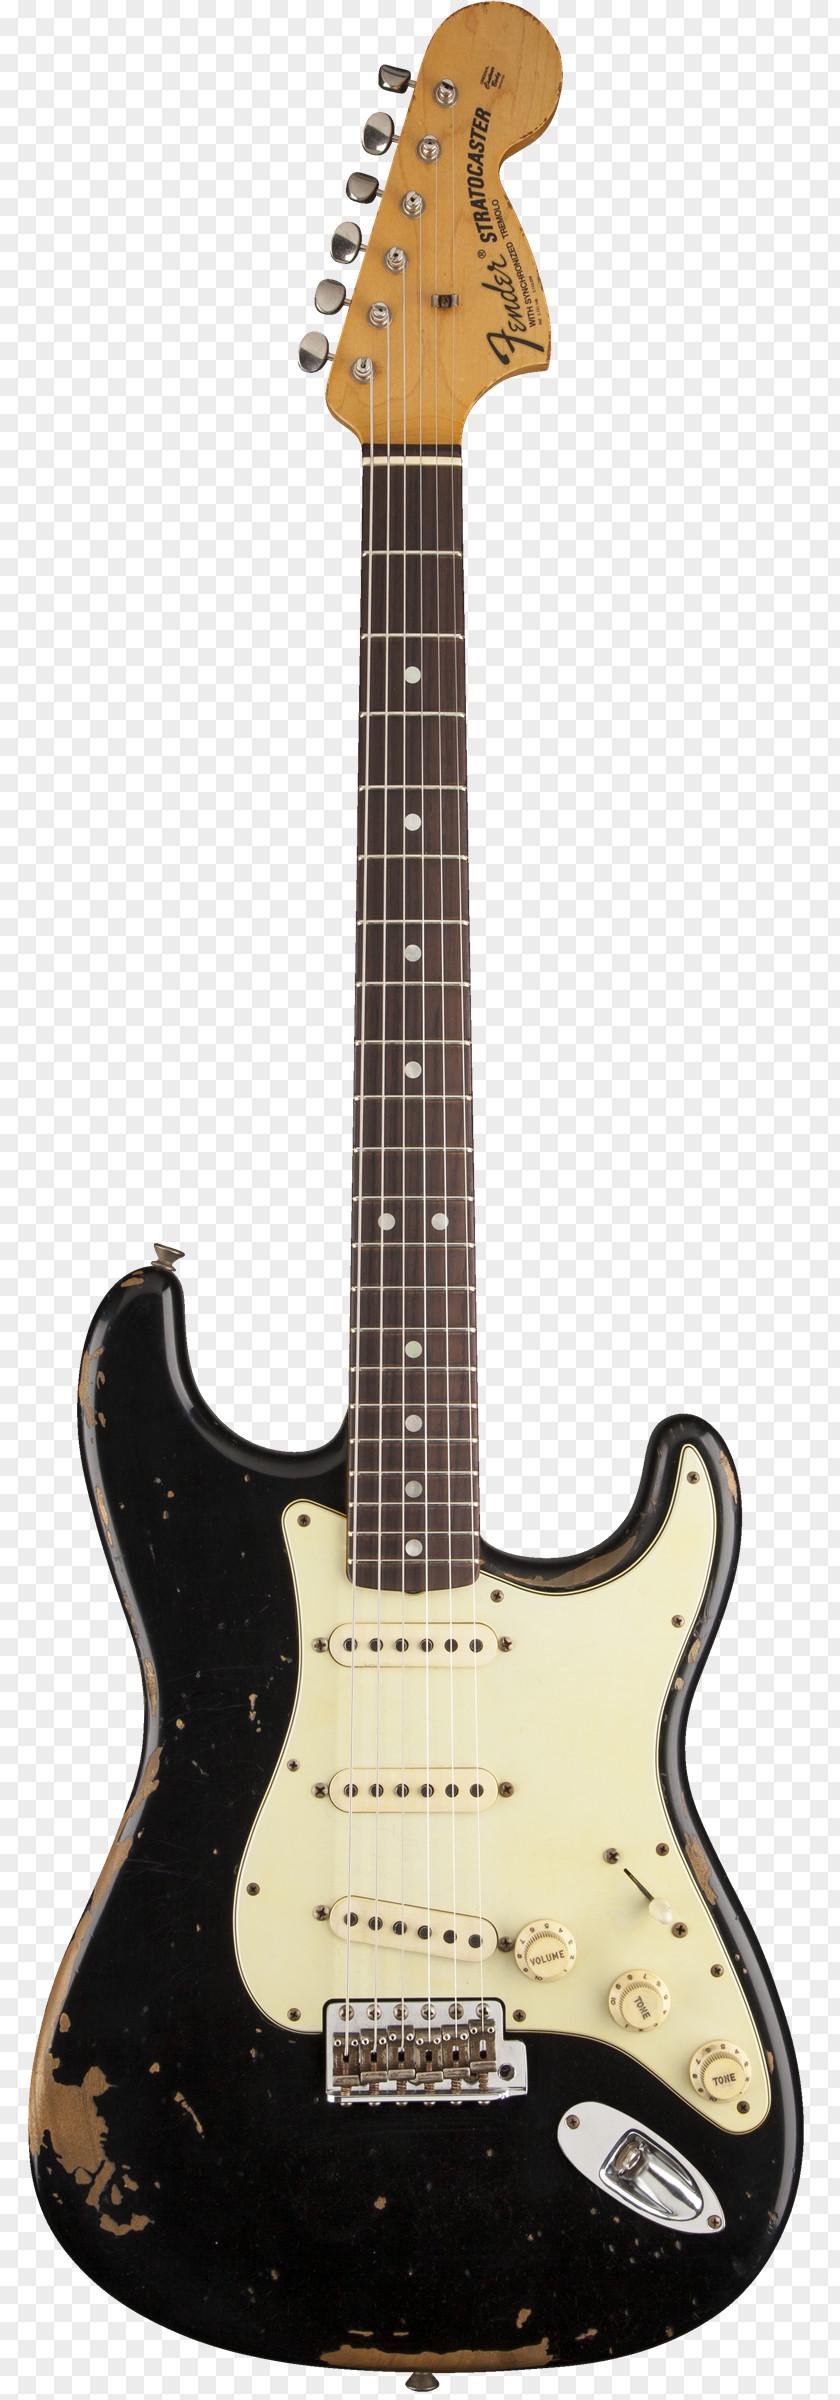 Electric Guitar Fender Stratocaster Musical Instruments Corporation Bullet American Deluxe Series PNG